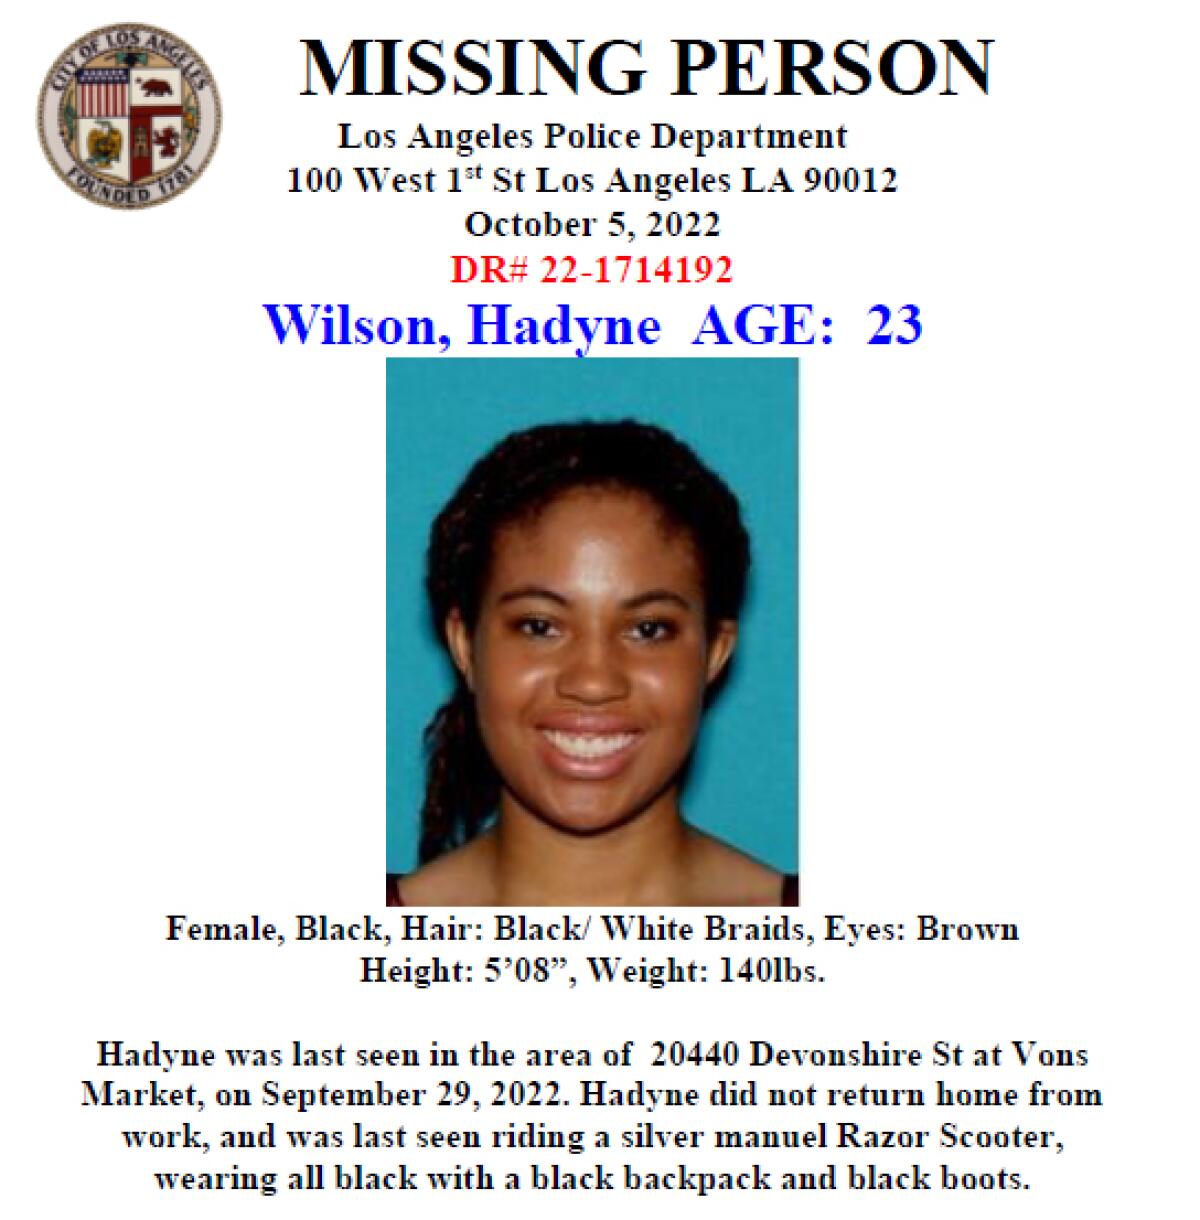 A missing person poster for Hadyne Wilson, age 23